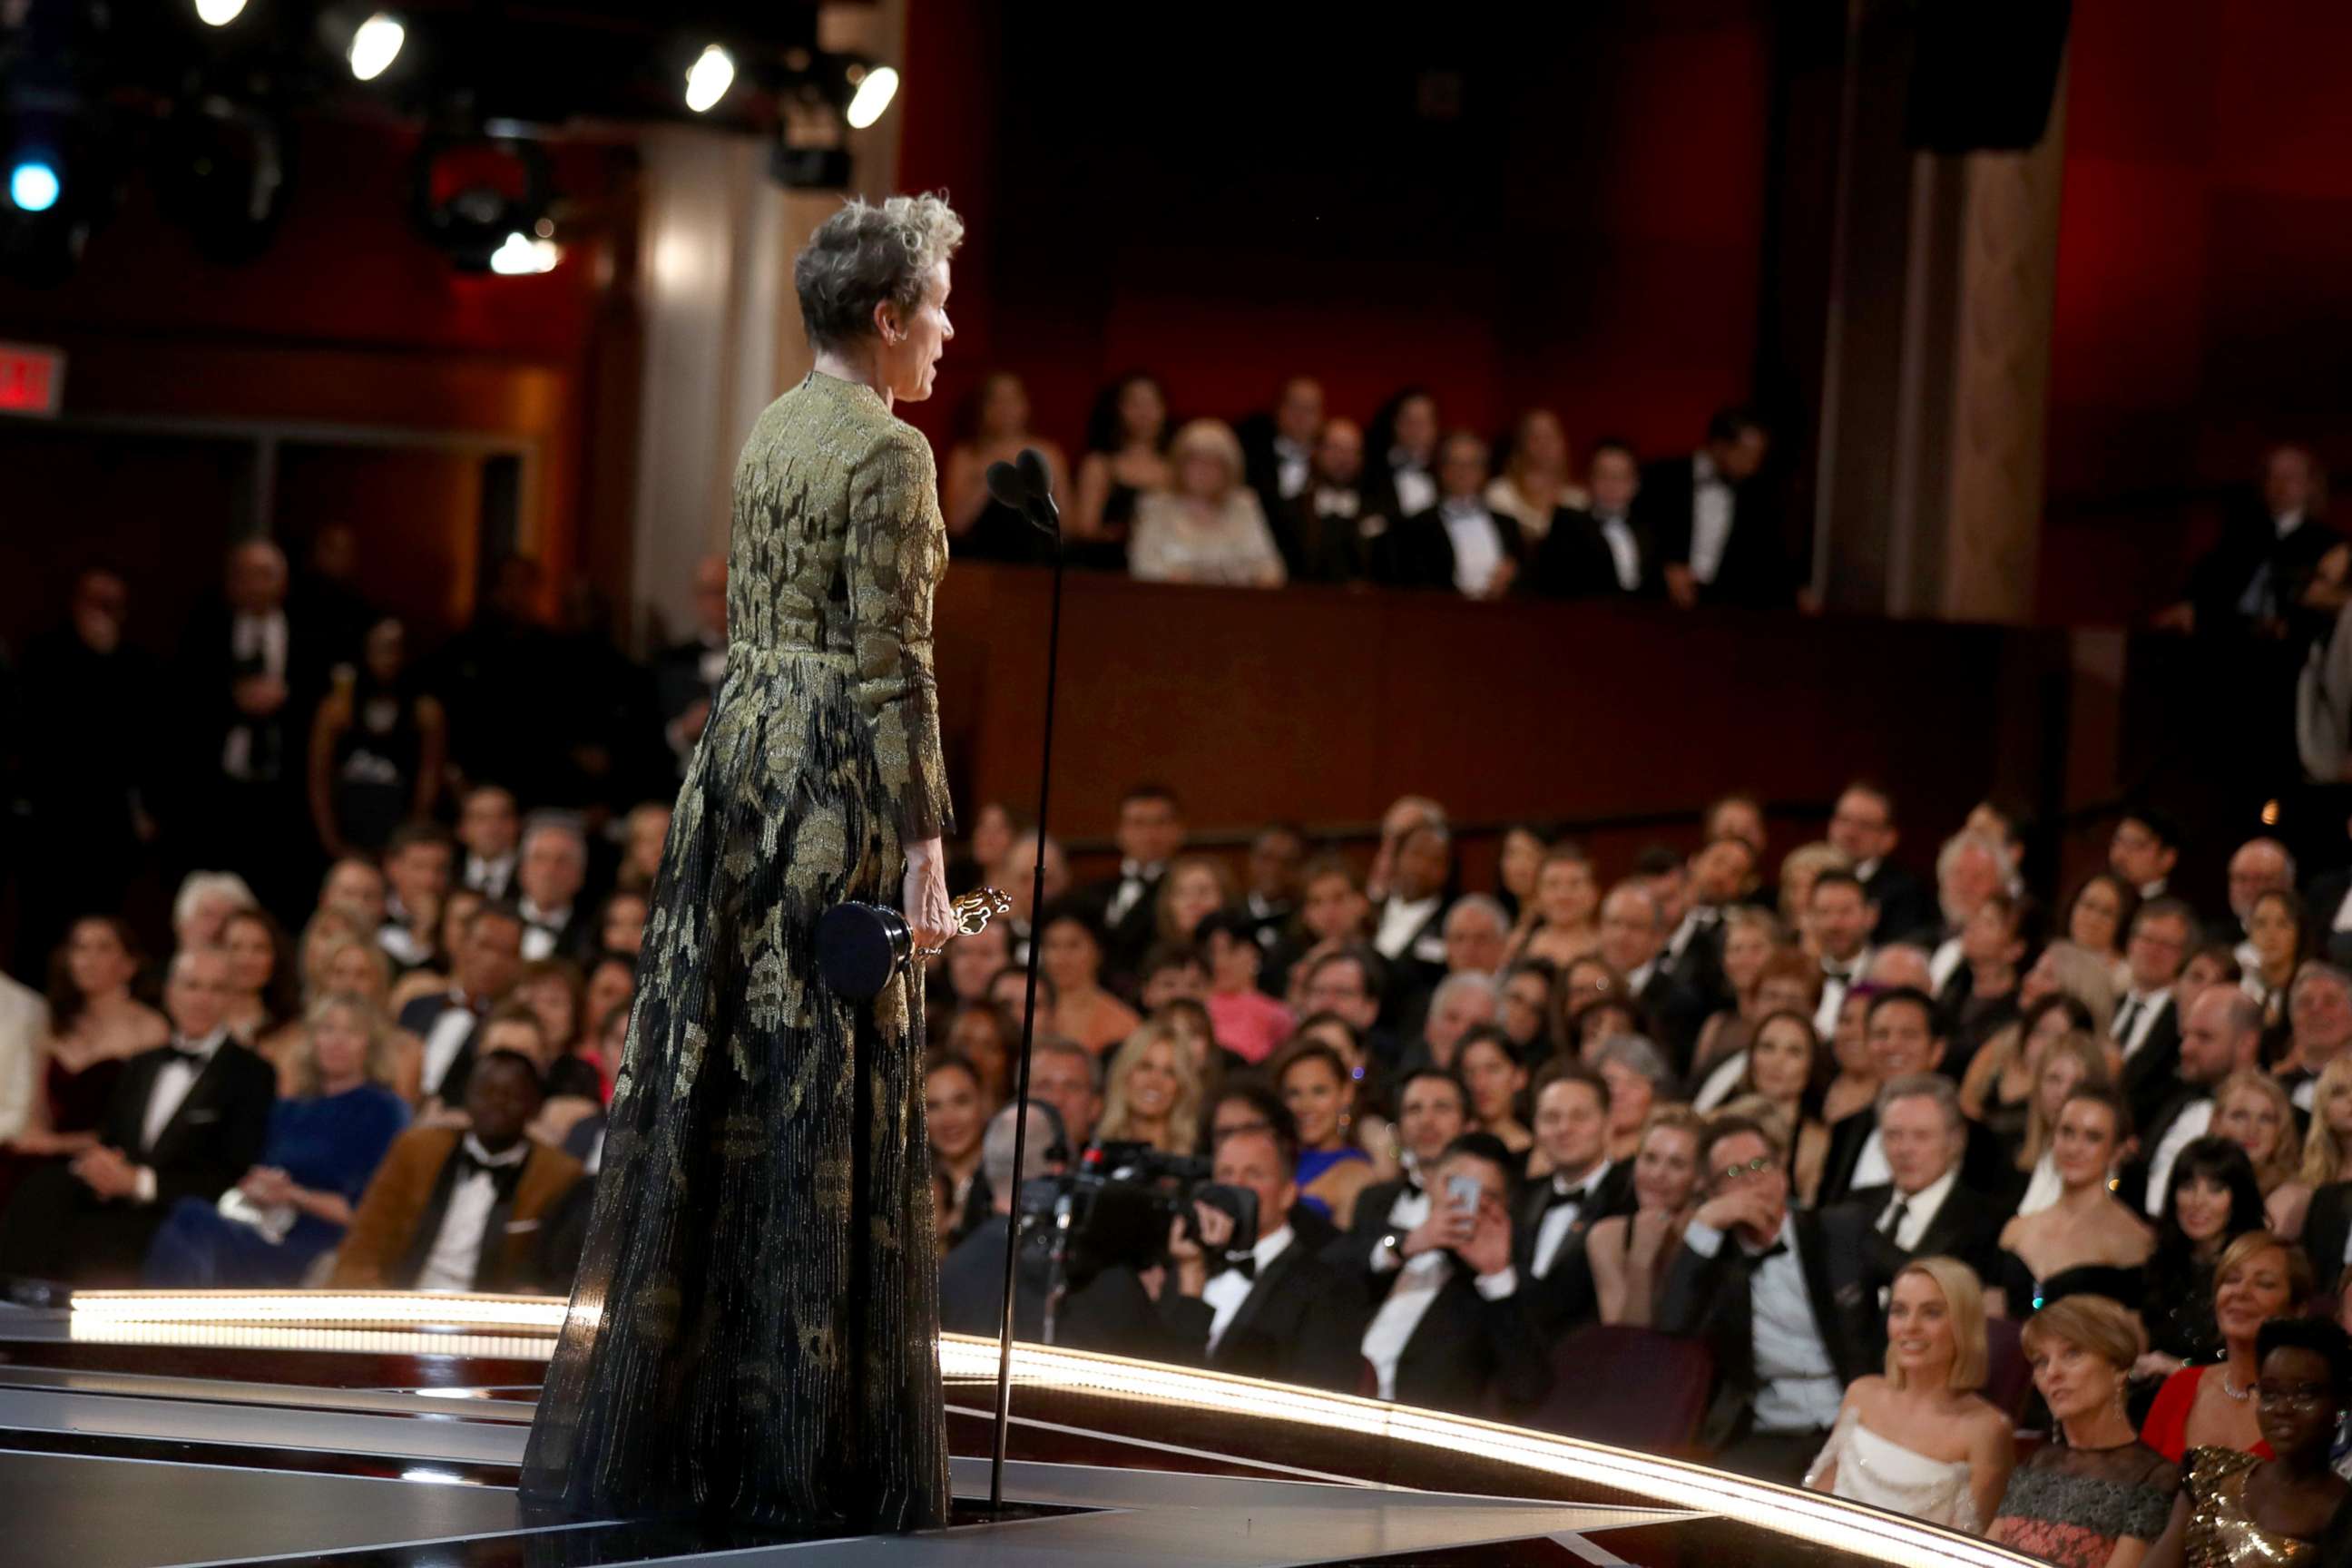 PHOTO: Frances McDormand gives her acceptance speech at the 90th Annual Academy Awards at the Dolby Theatre on March 4, 2018 in Hollywood, Calif.